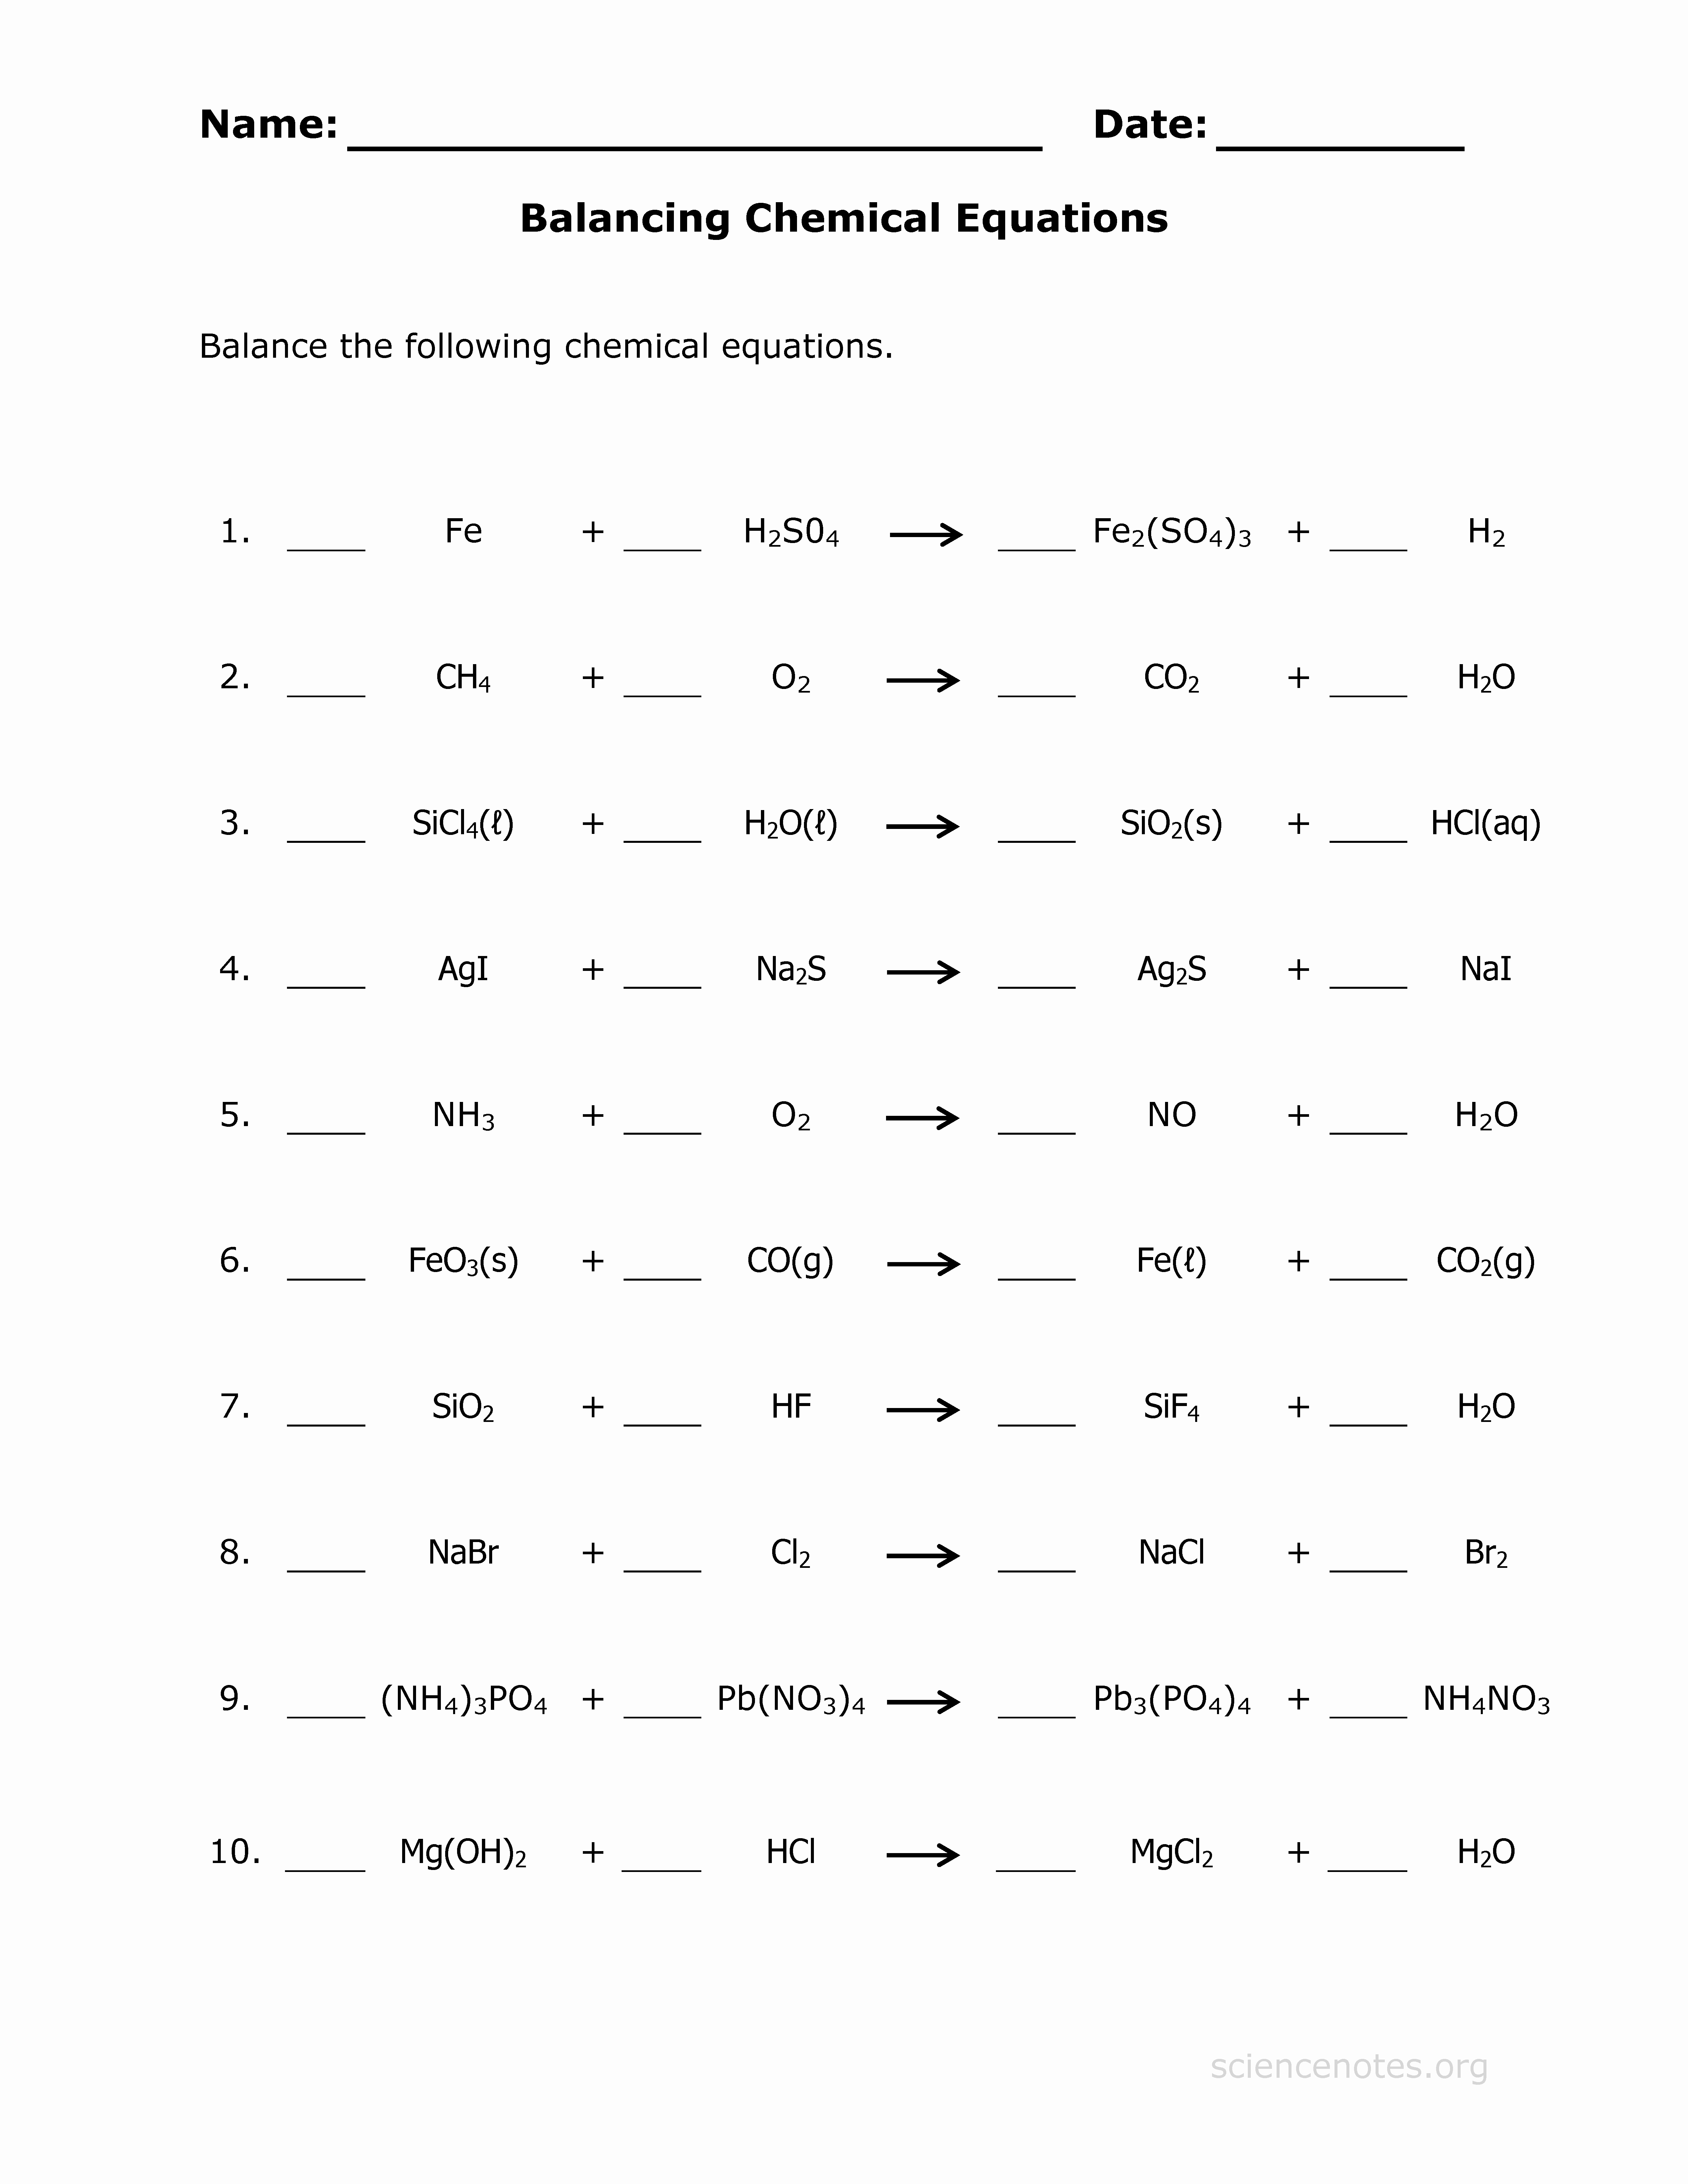 Worksheet Balancing Equations Answers Best Of Balancing Equations Worksheet Health and Fitness Training